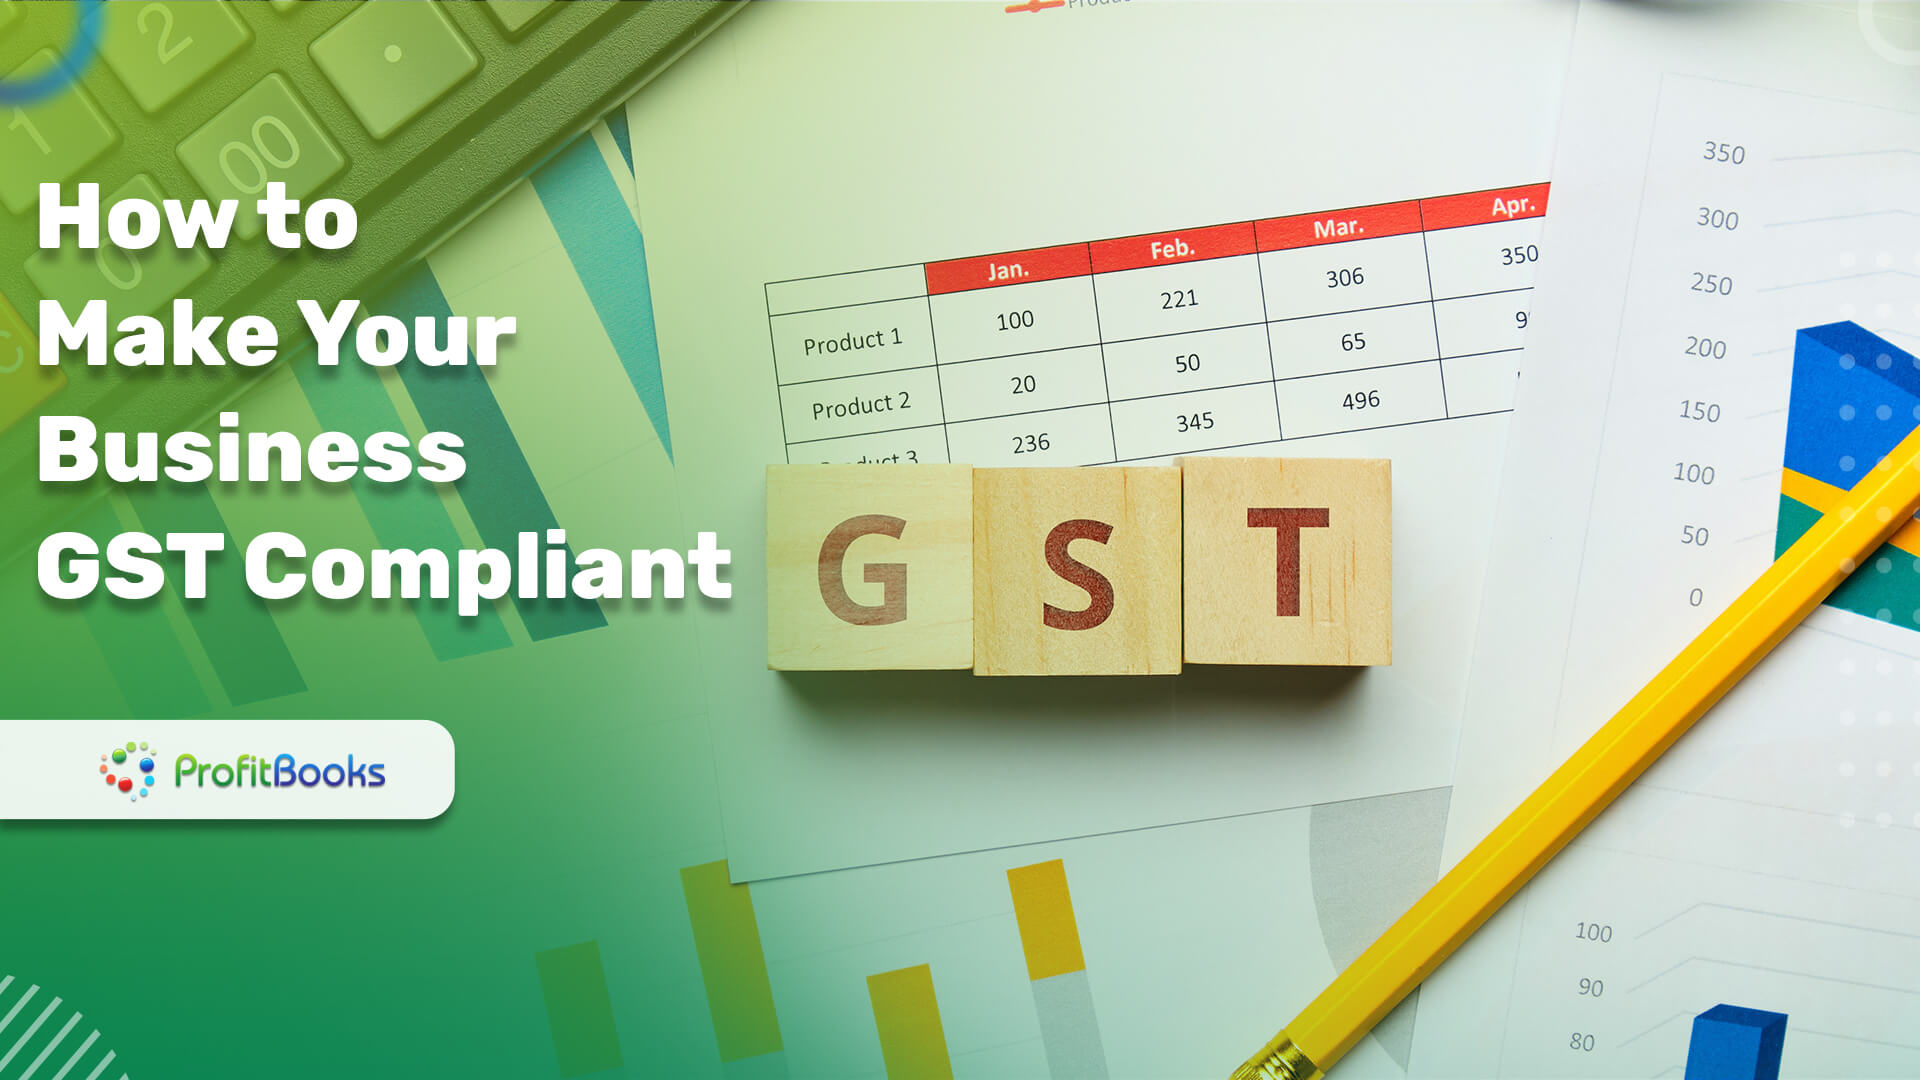 How to Make Your Business GST Compliant